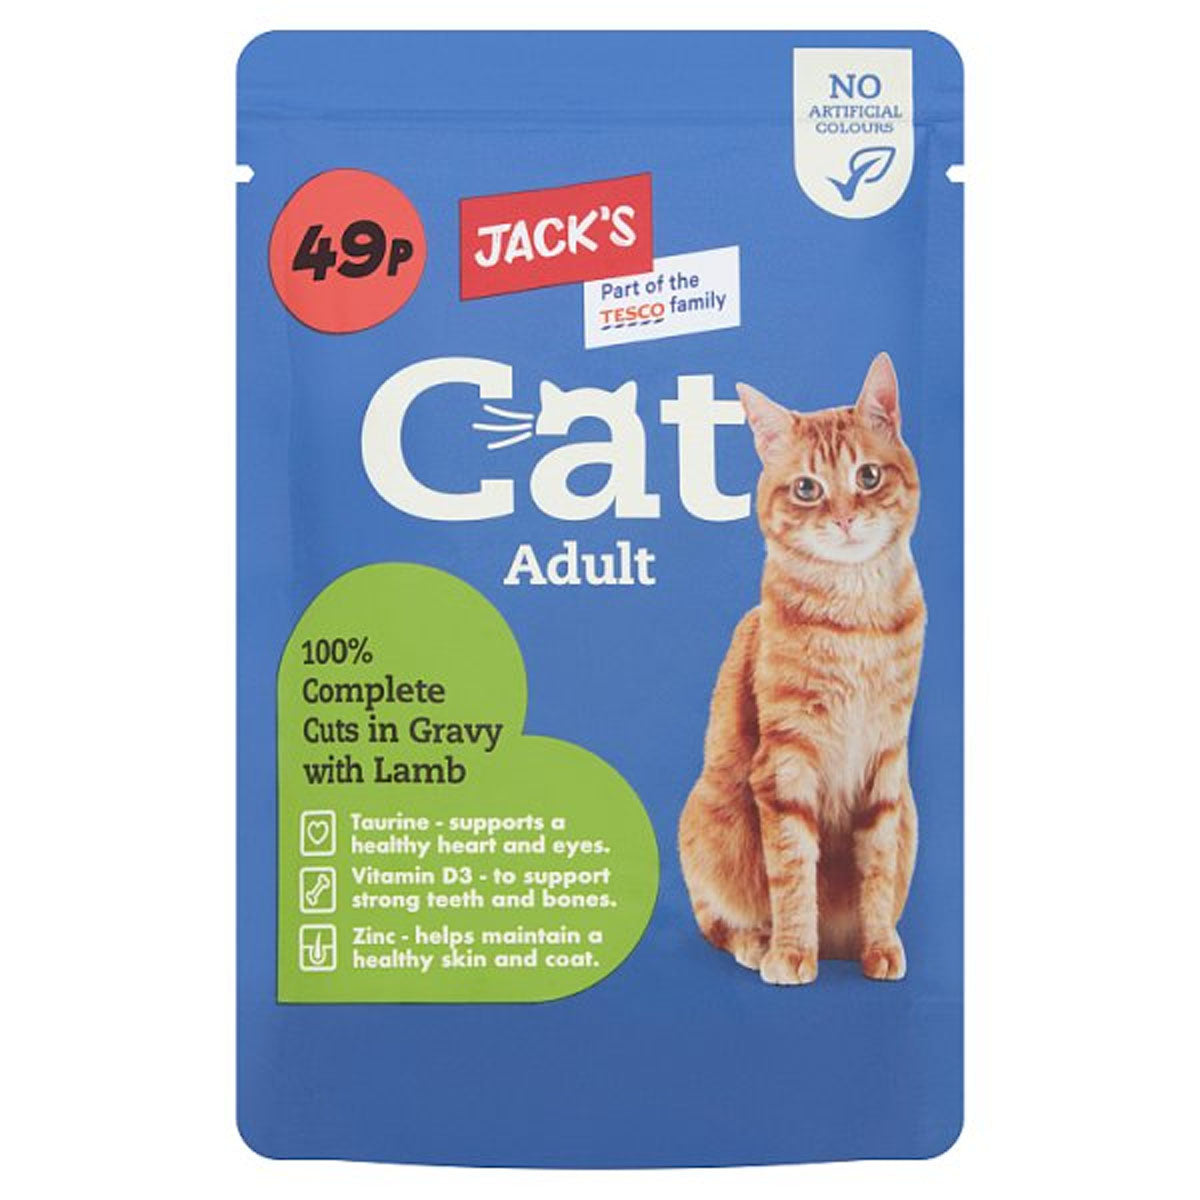 Jacks - Cat Adult 100% Complete Cuts in Gravy with Lamb 100g.